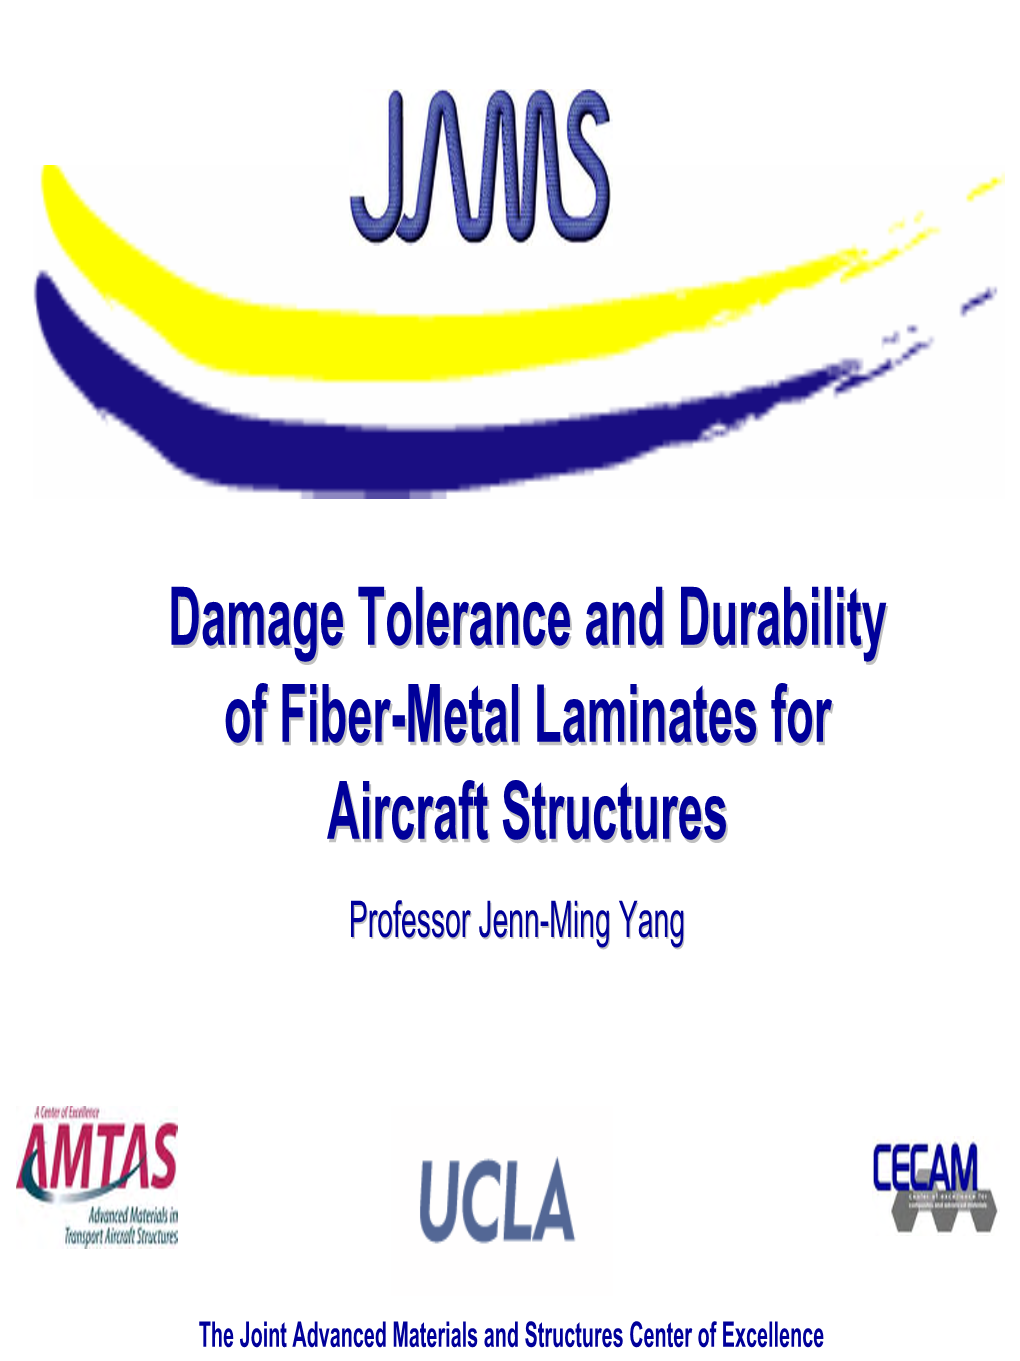 Damage Tolerance and Durability of Fiber-Metal Laminates for Aircraft Structures